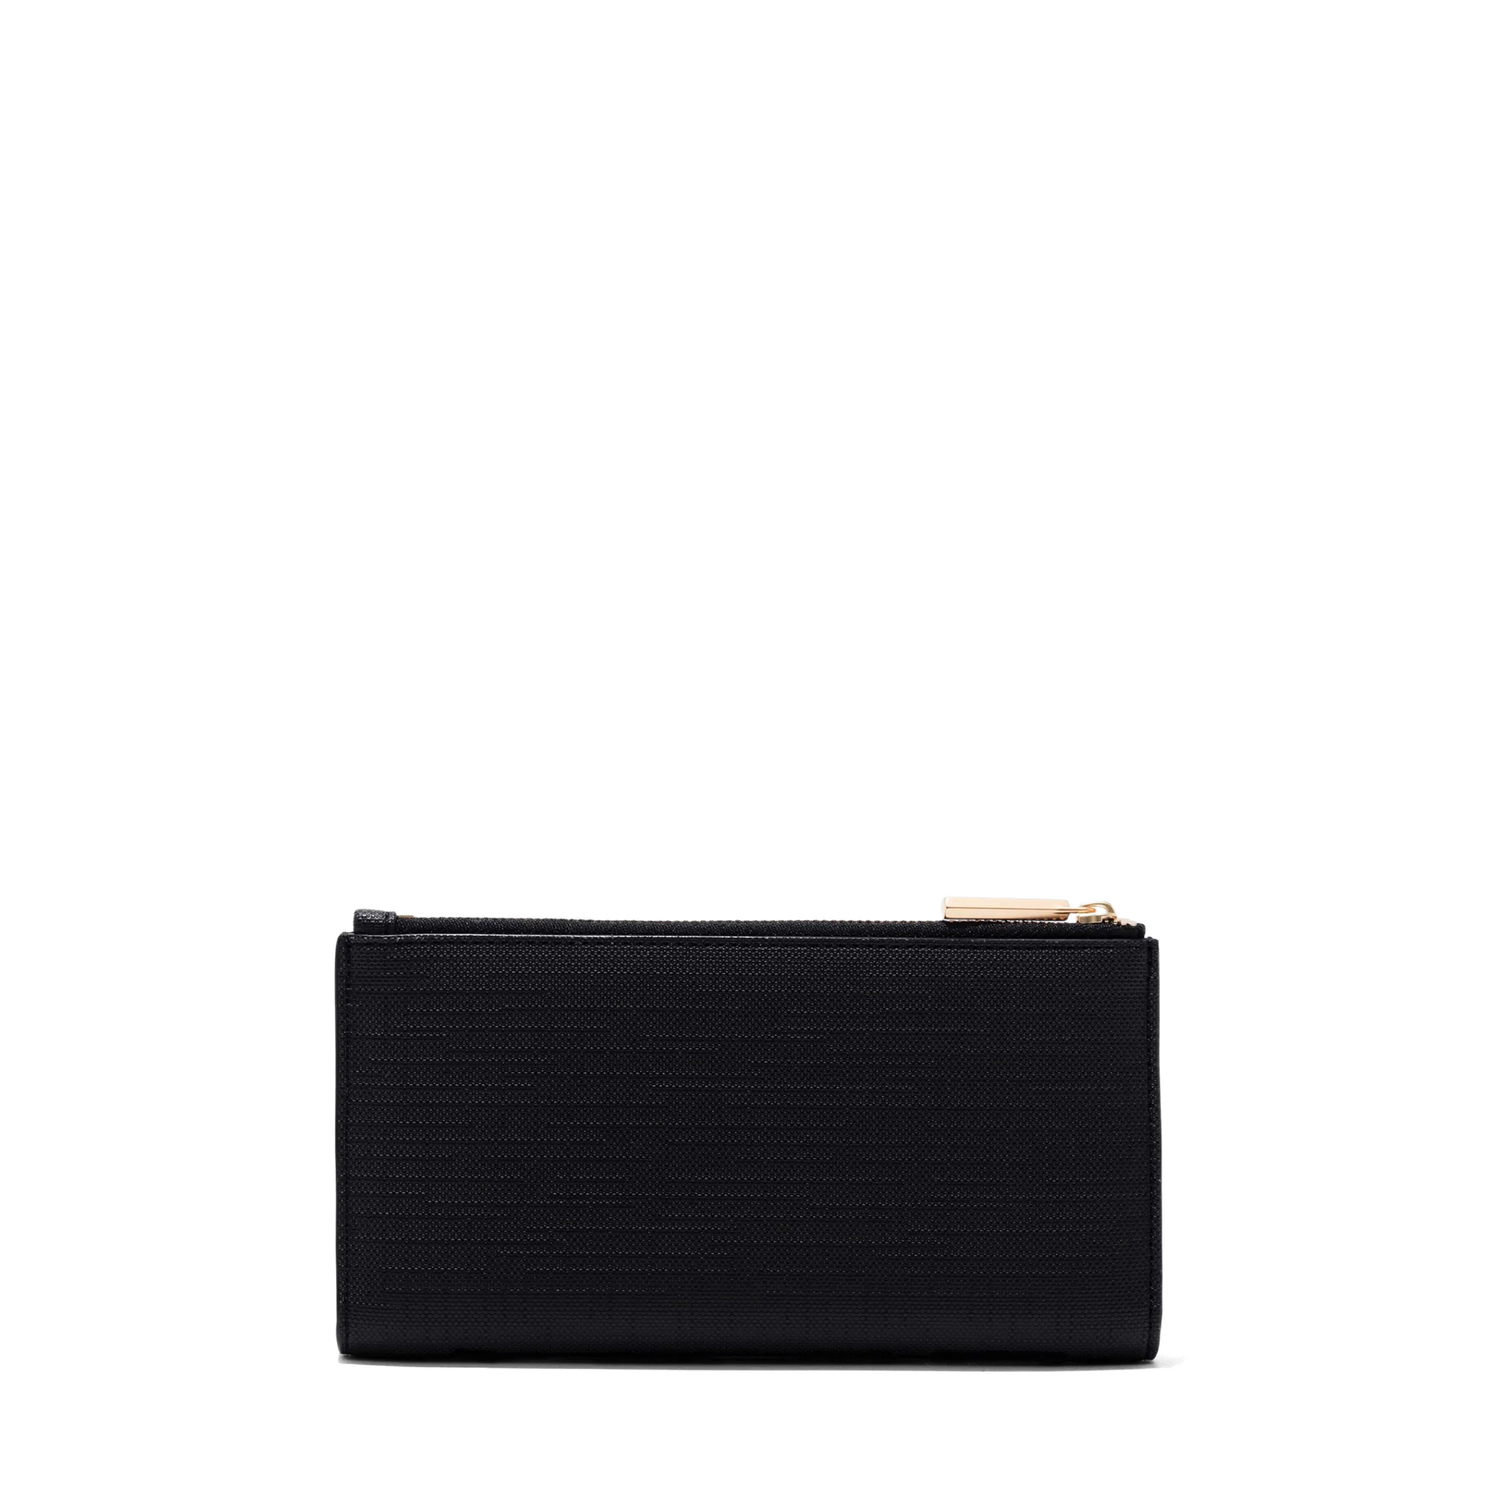 Discover Louis Vuitton Card Holder: This simple yet chic card